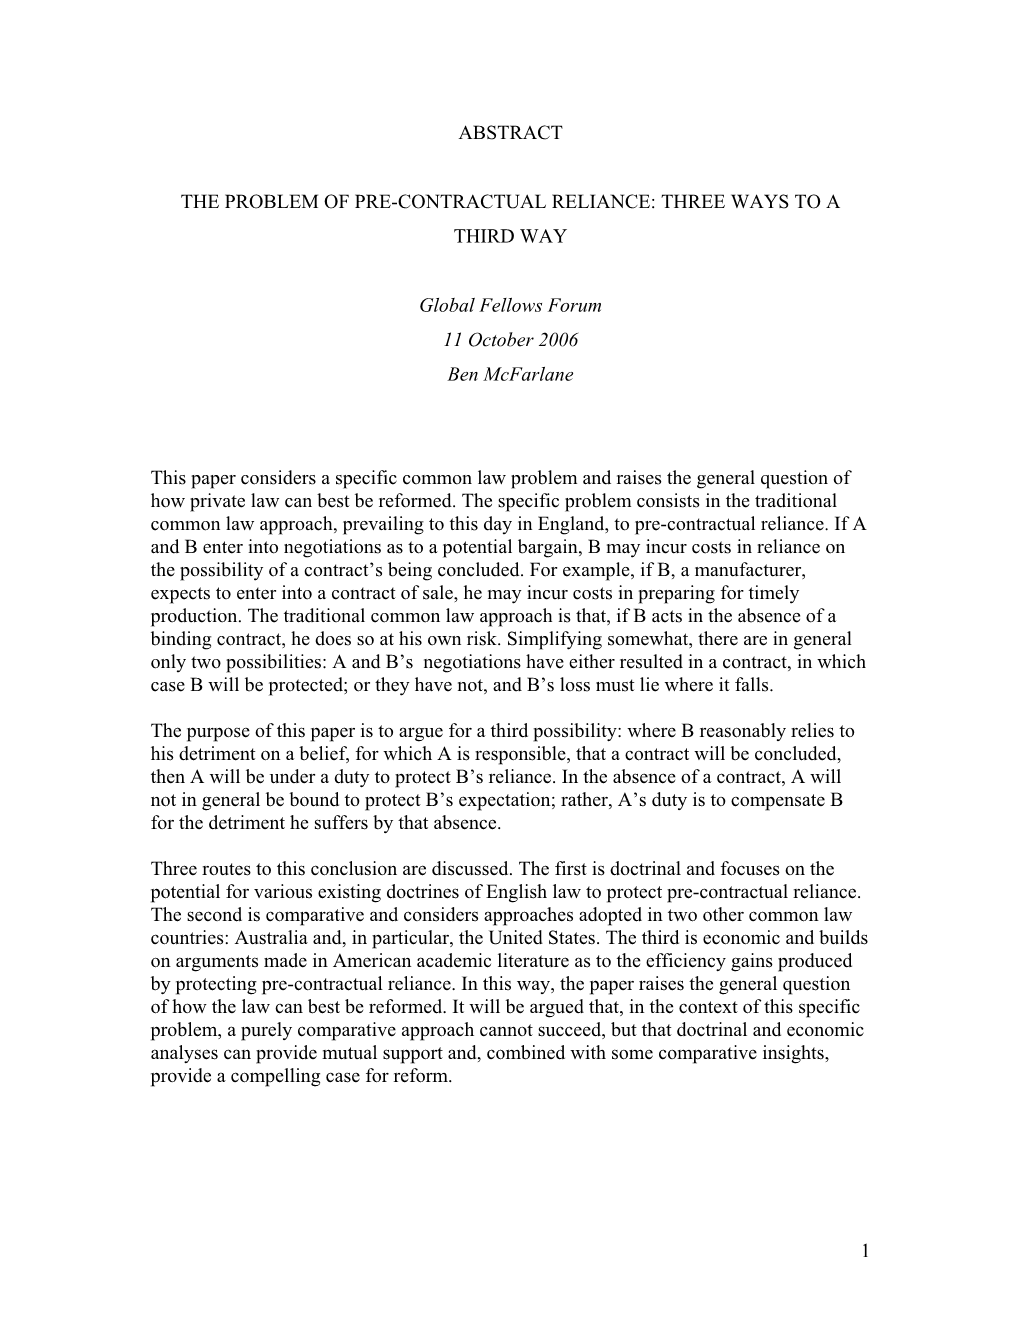 1 Abstract the Problem of Pre-Contractual Reliance